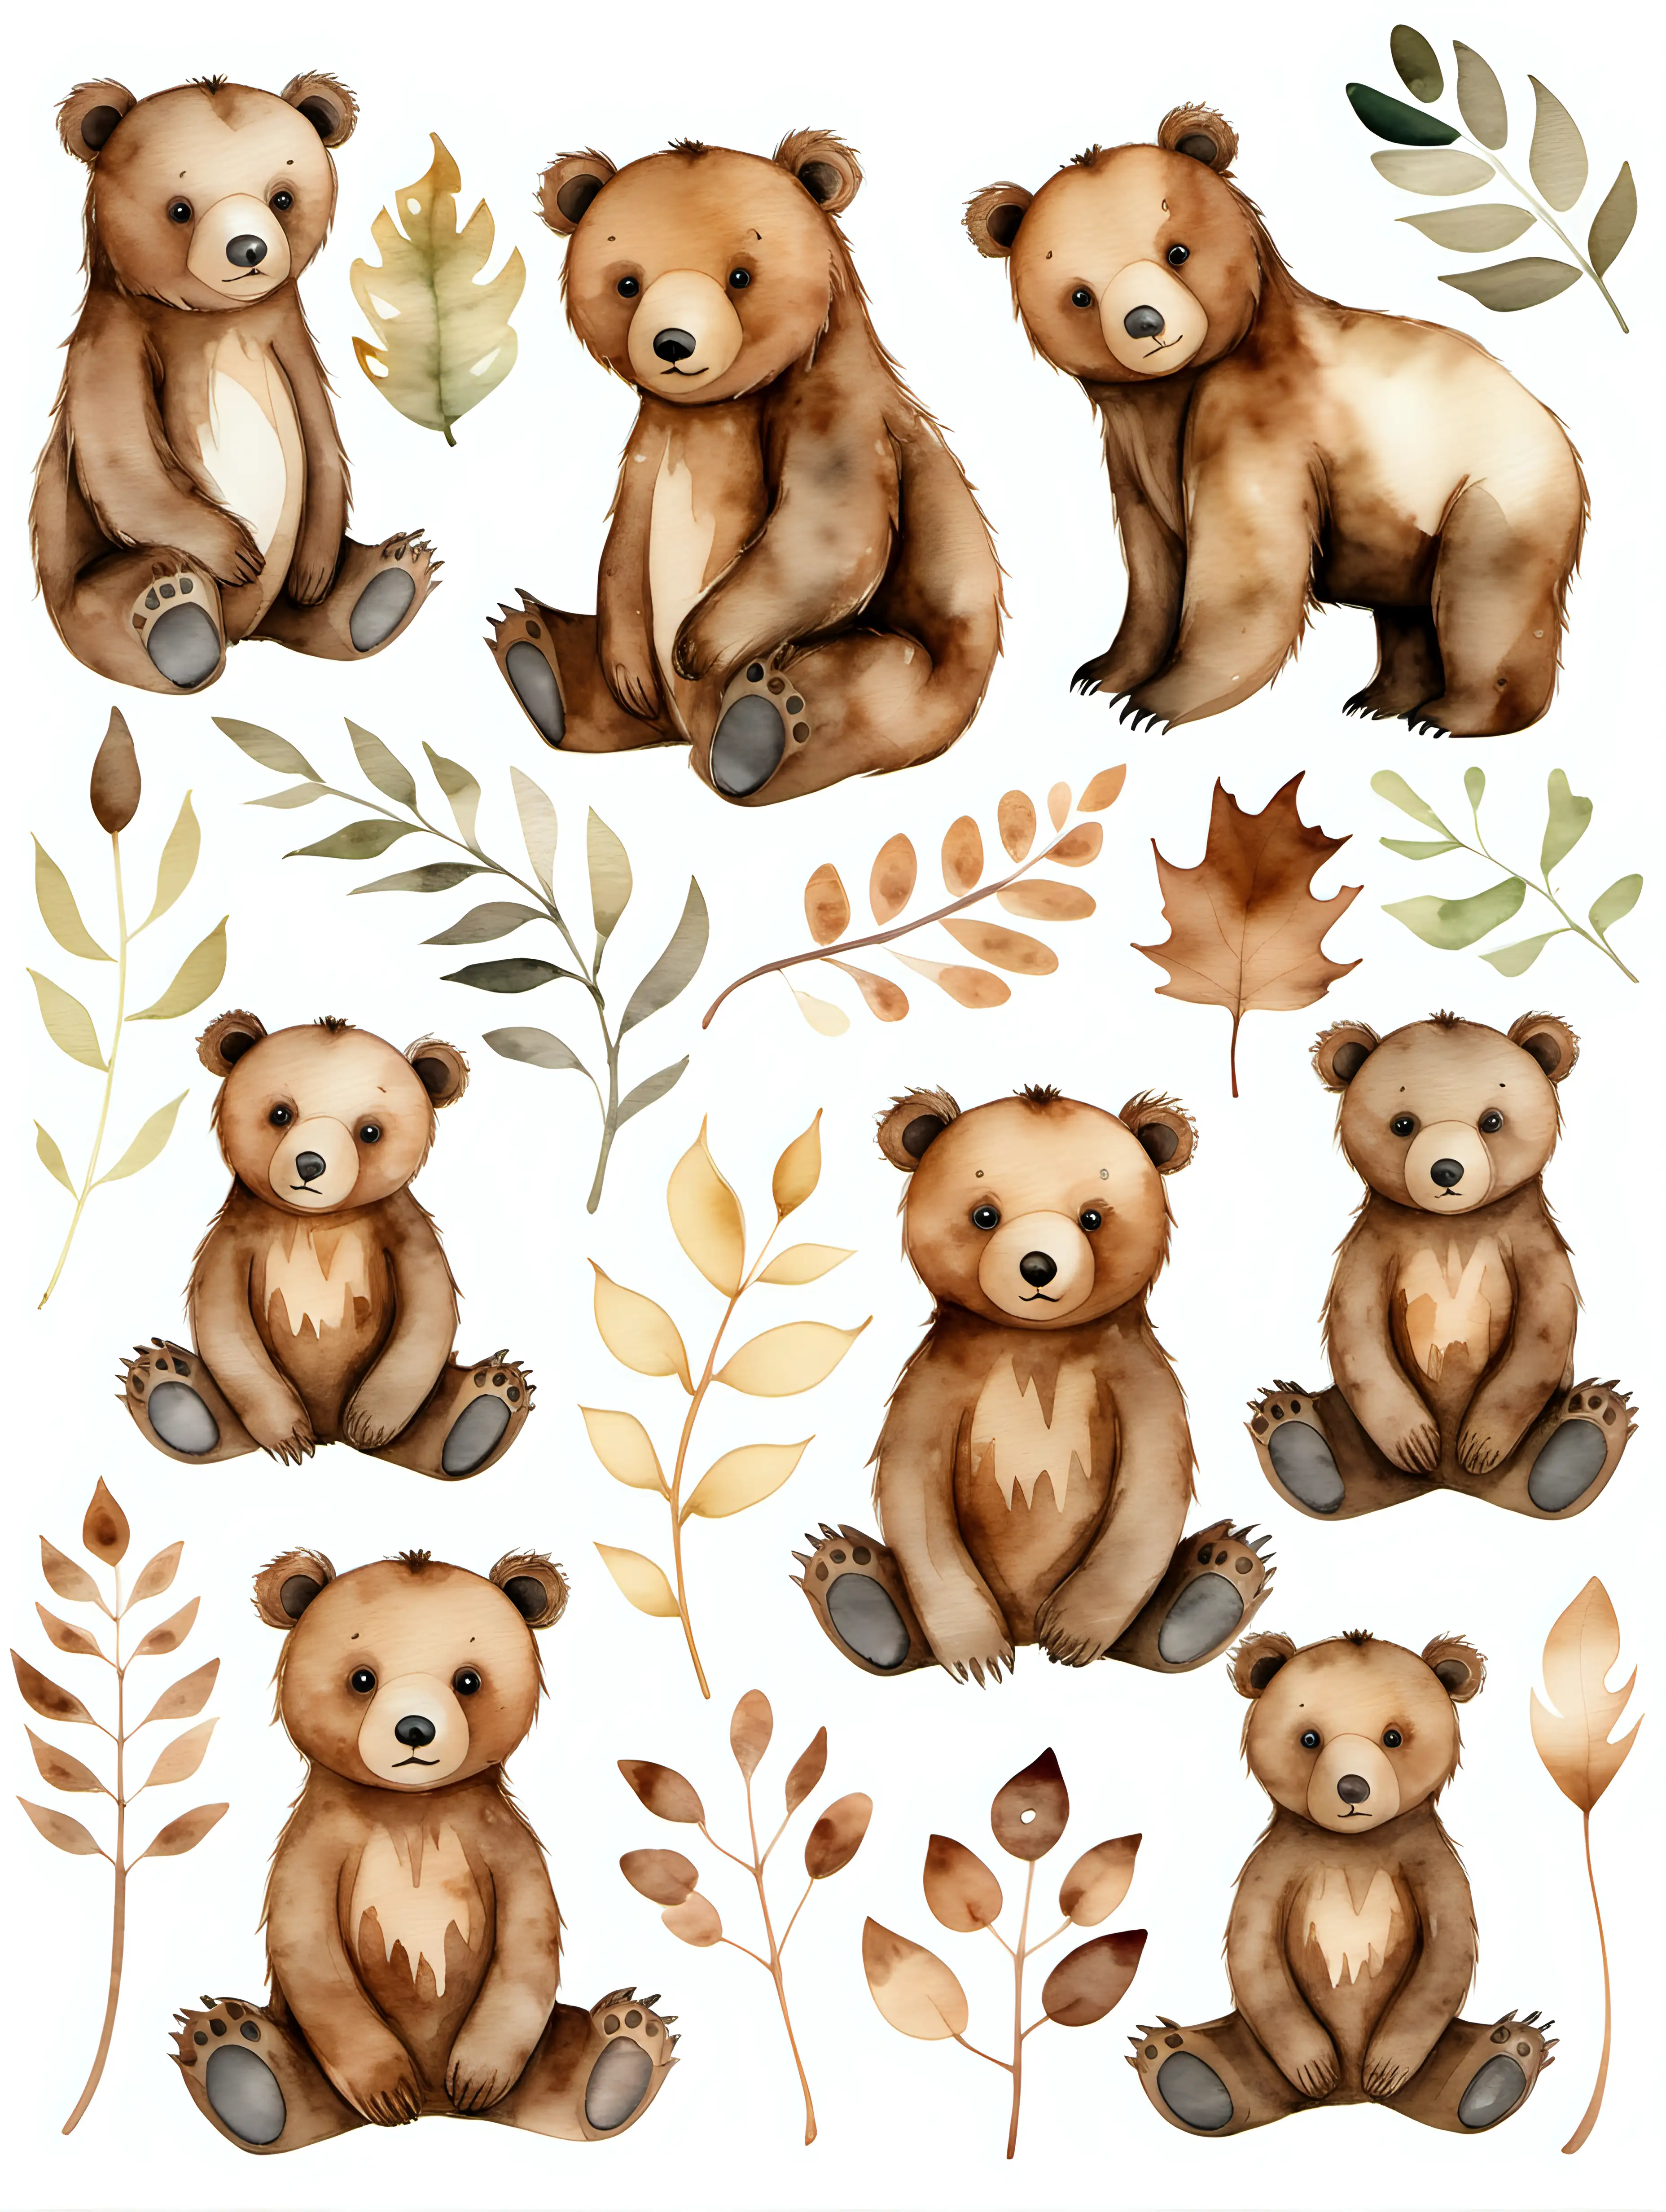 Watercolor Brown Bear Clipart Whimsical Woodland Illustration for Nursery Decor